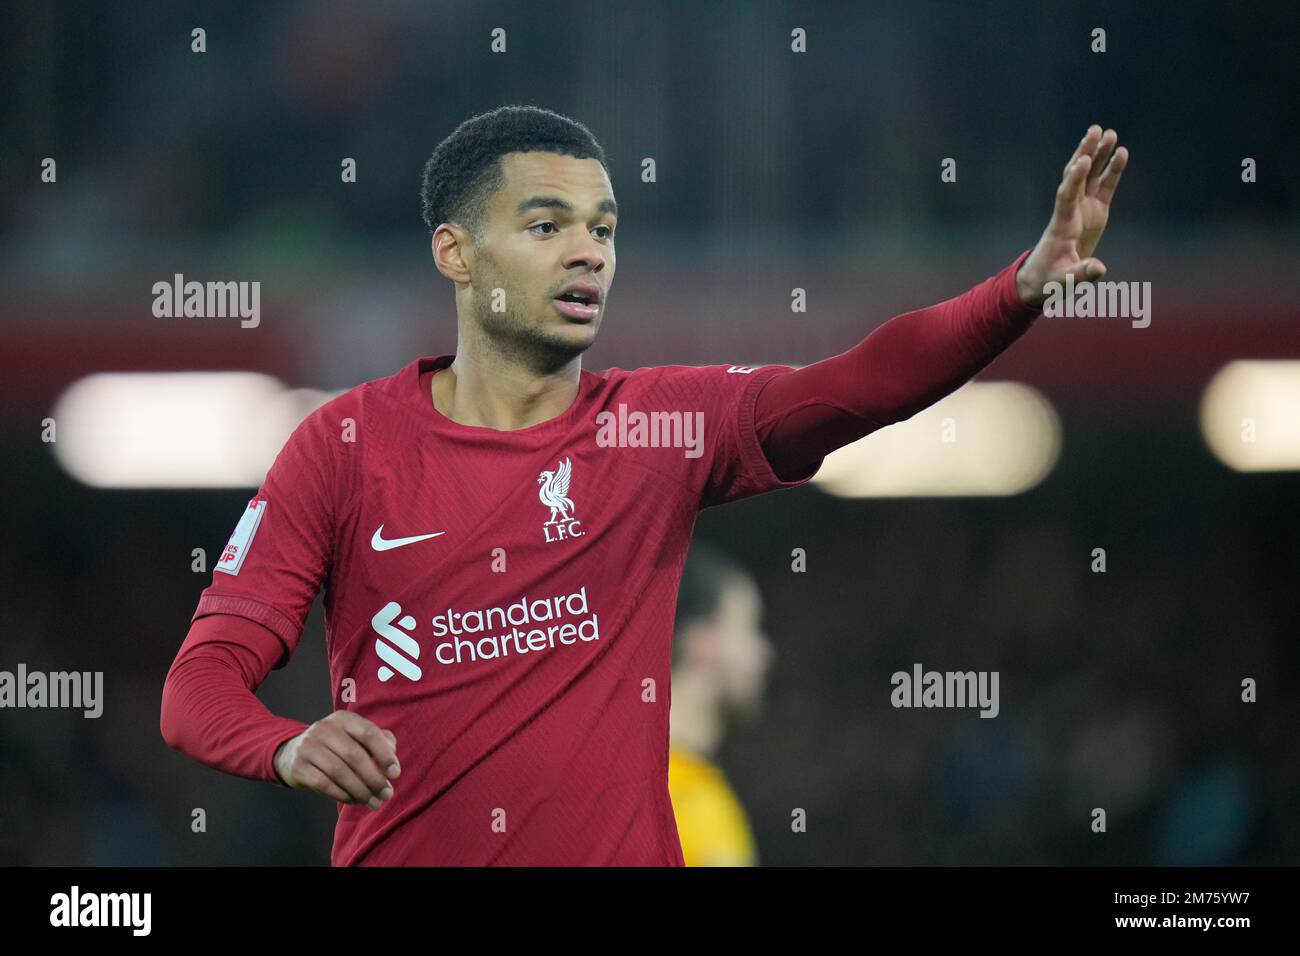 Cody Gakpo #18 of Liverpool during the Emirates FA Cup Third Round match Liverpool vs Wolverhampton Wanderers at Anfield, Liverpool, United Kingdom, 7th January 2023  (Photo by Steve Flynn/News Images) Stock Photo